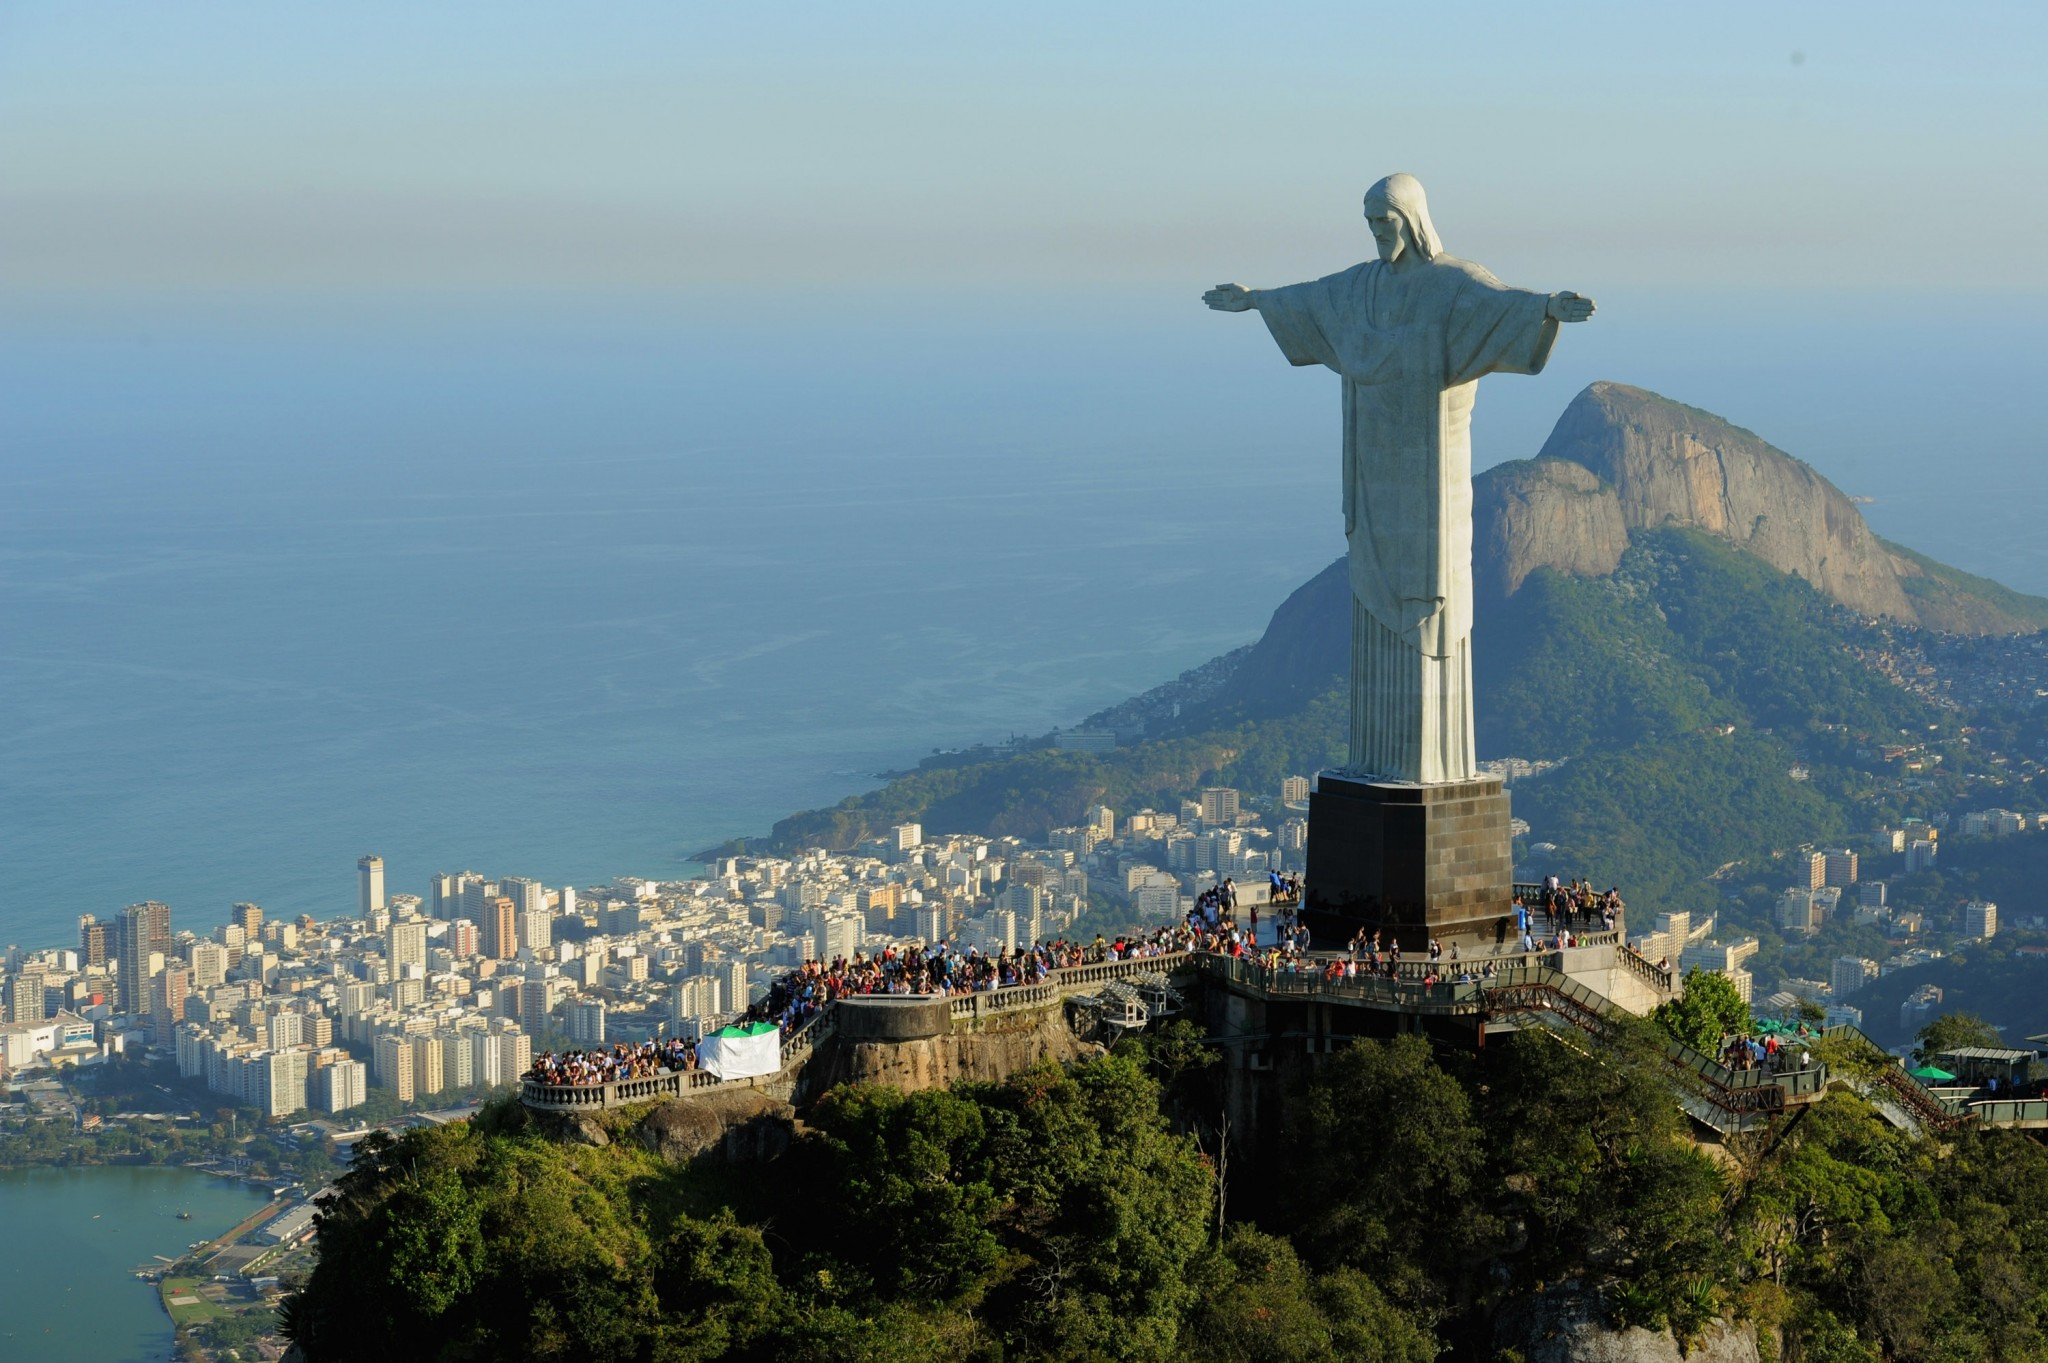 Rio de Janeiro had been initially chosen to host the ANOC General Assembly next April 